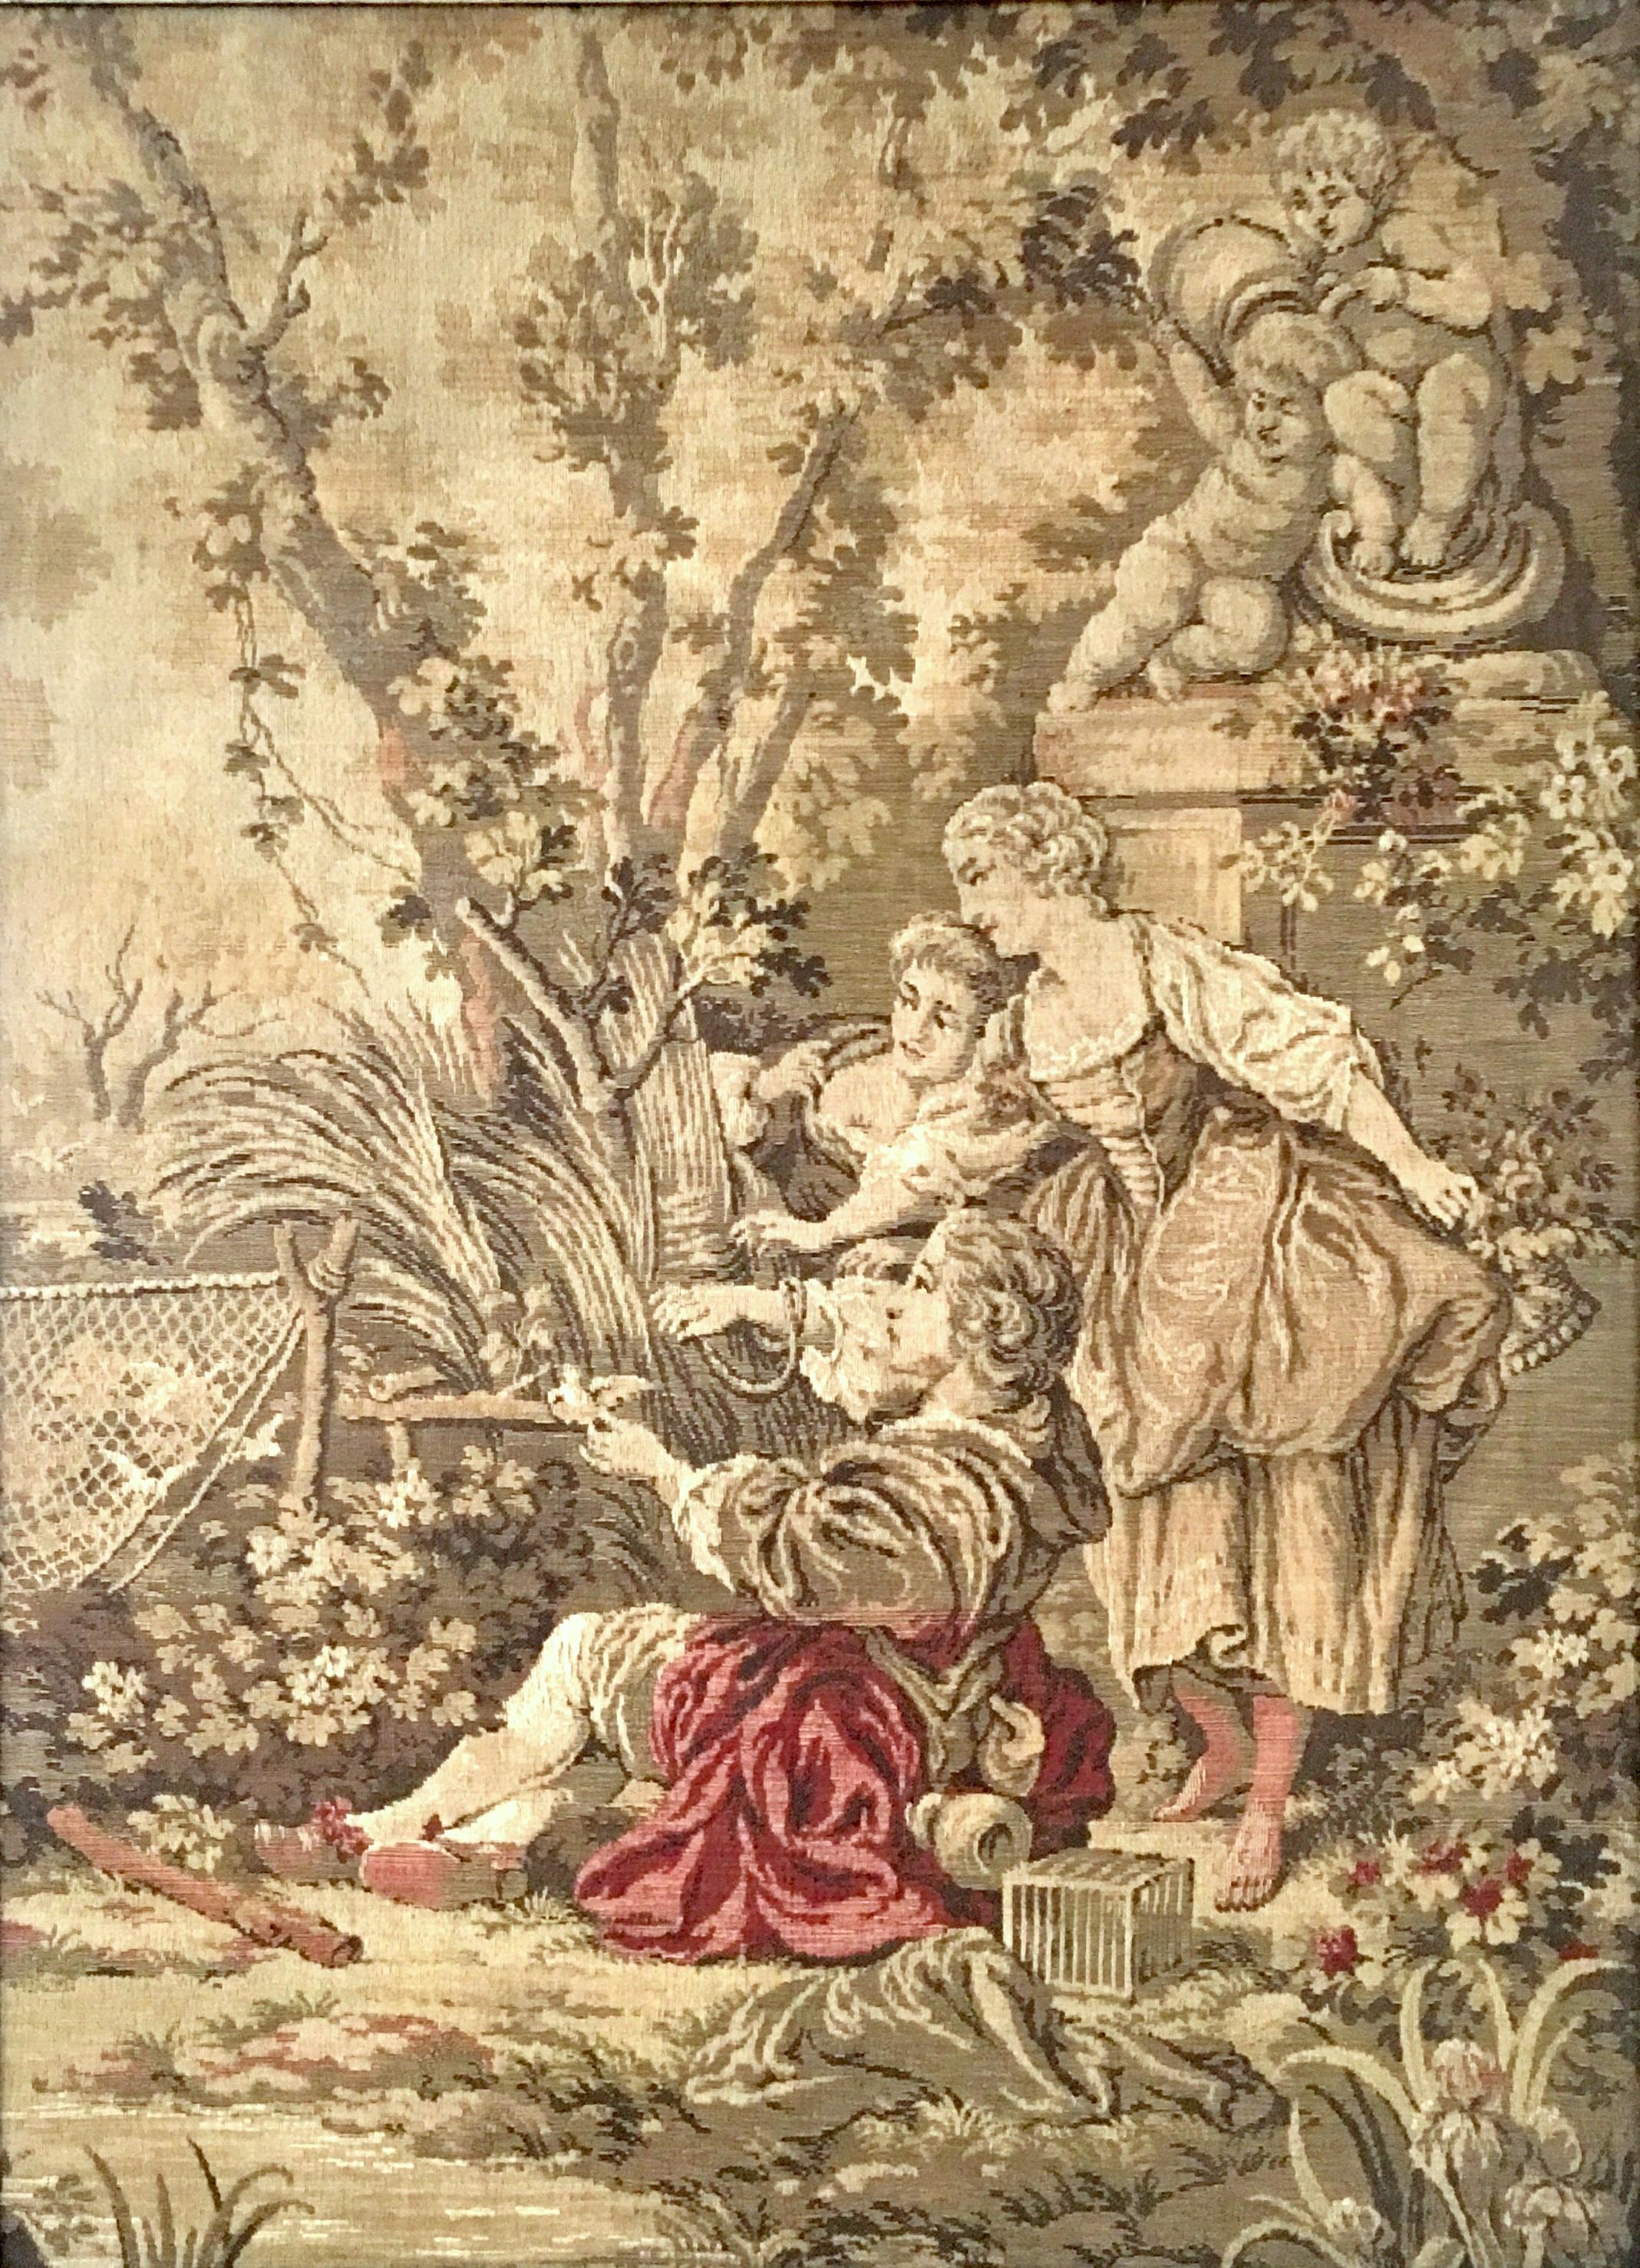 20th Century Belgian hanging framed tapestry, signed. This gorgeous wool, golden hue tapestry is framed in a gilt wood frame. Features a 17th century trio of women in the garden motif. Signed on the underside, Made In Belgium.